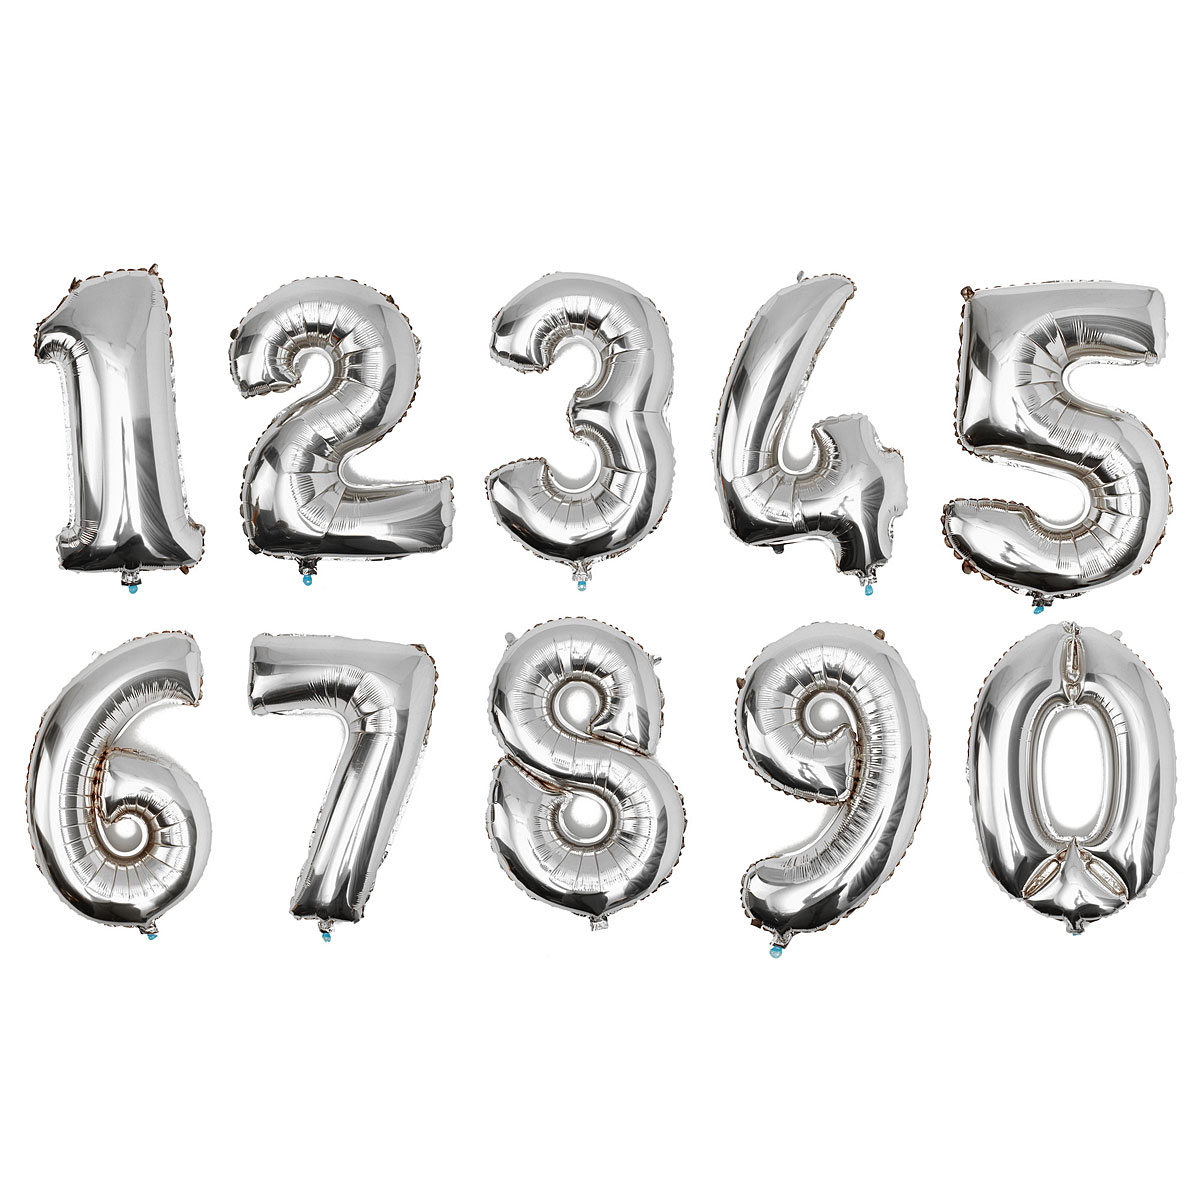 Gold-Silver-Number-Foil-Balloon-Wedding-Birthday-Party-Decoration-971829-2